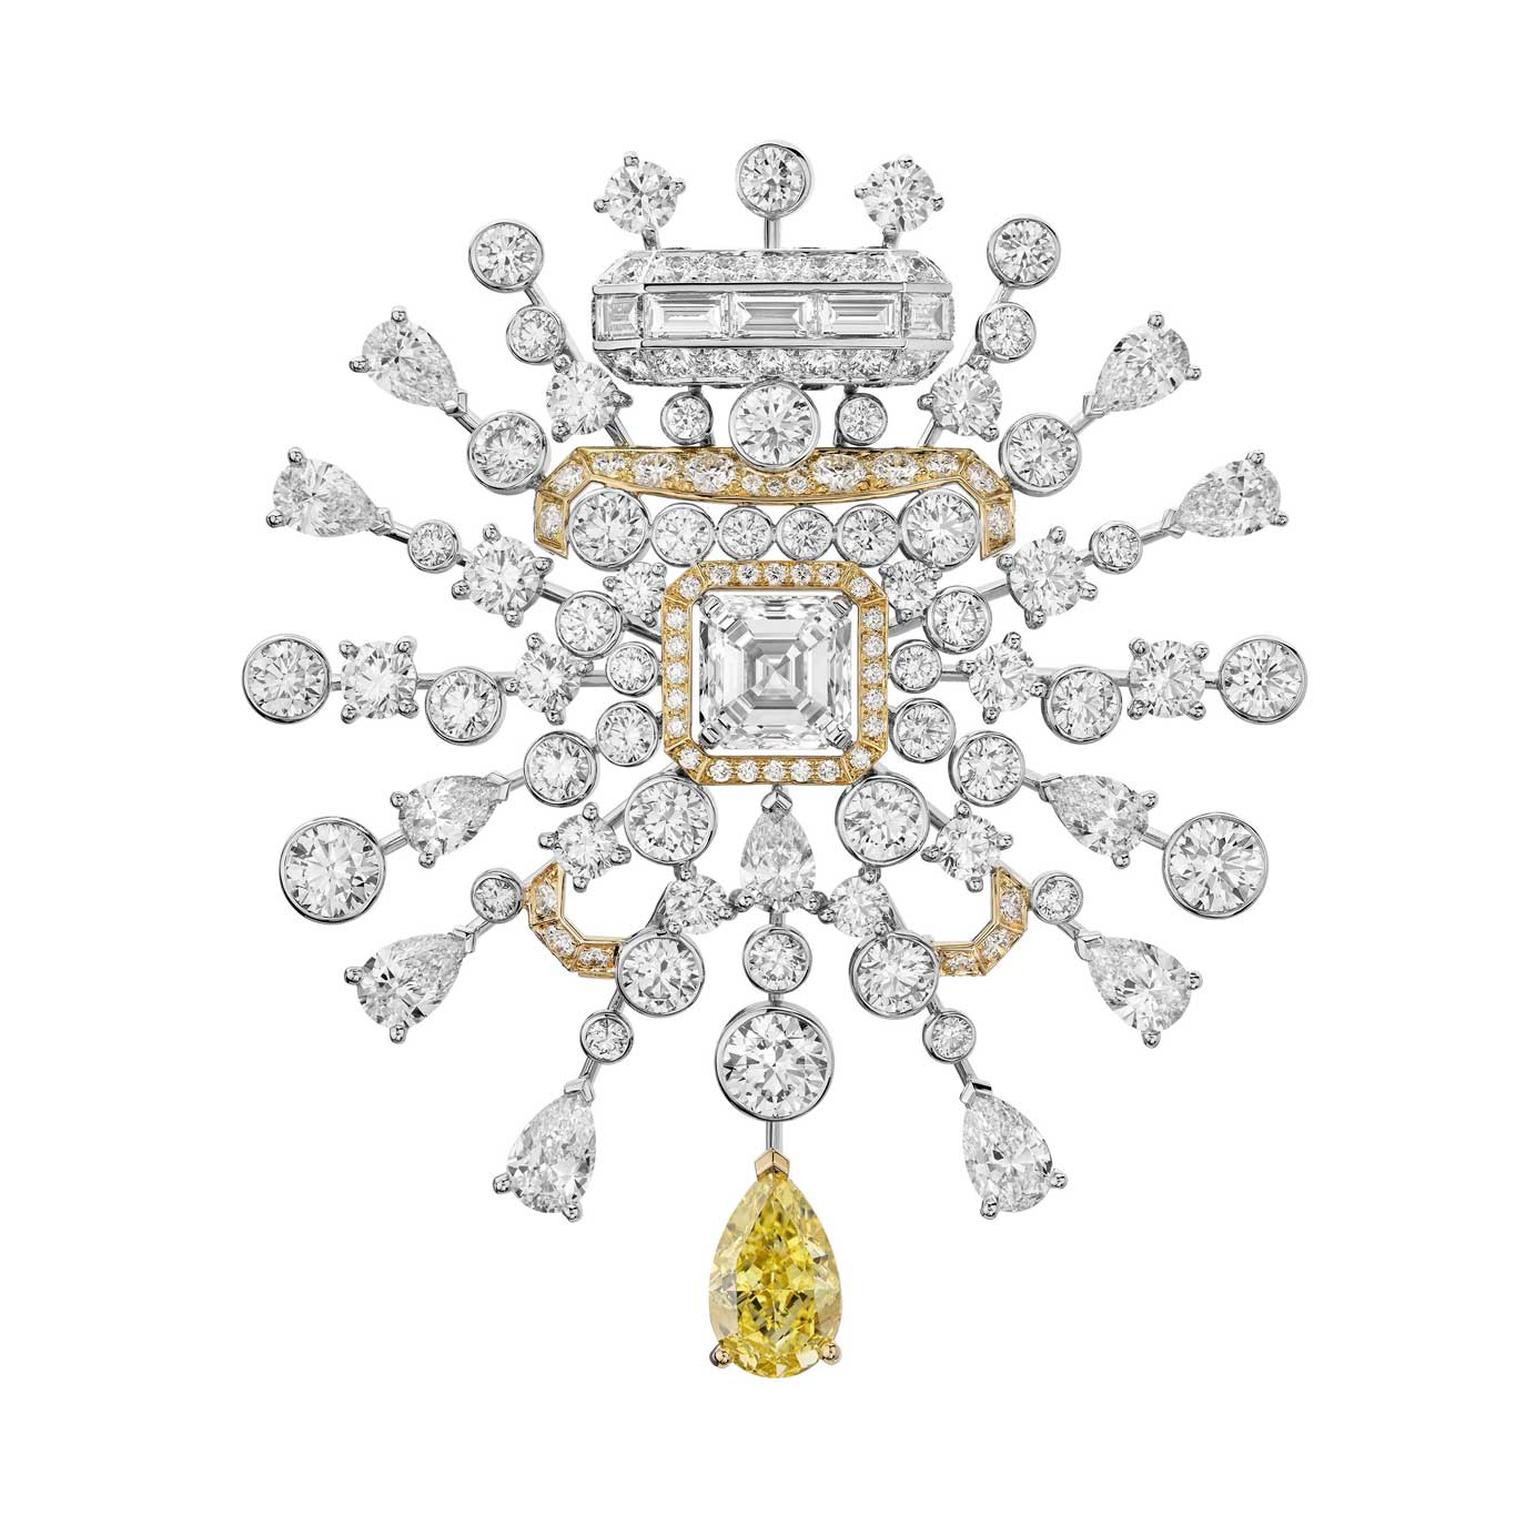 Chanel Collection No 5 GOLDEN SILLAGE brooch